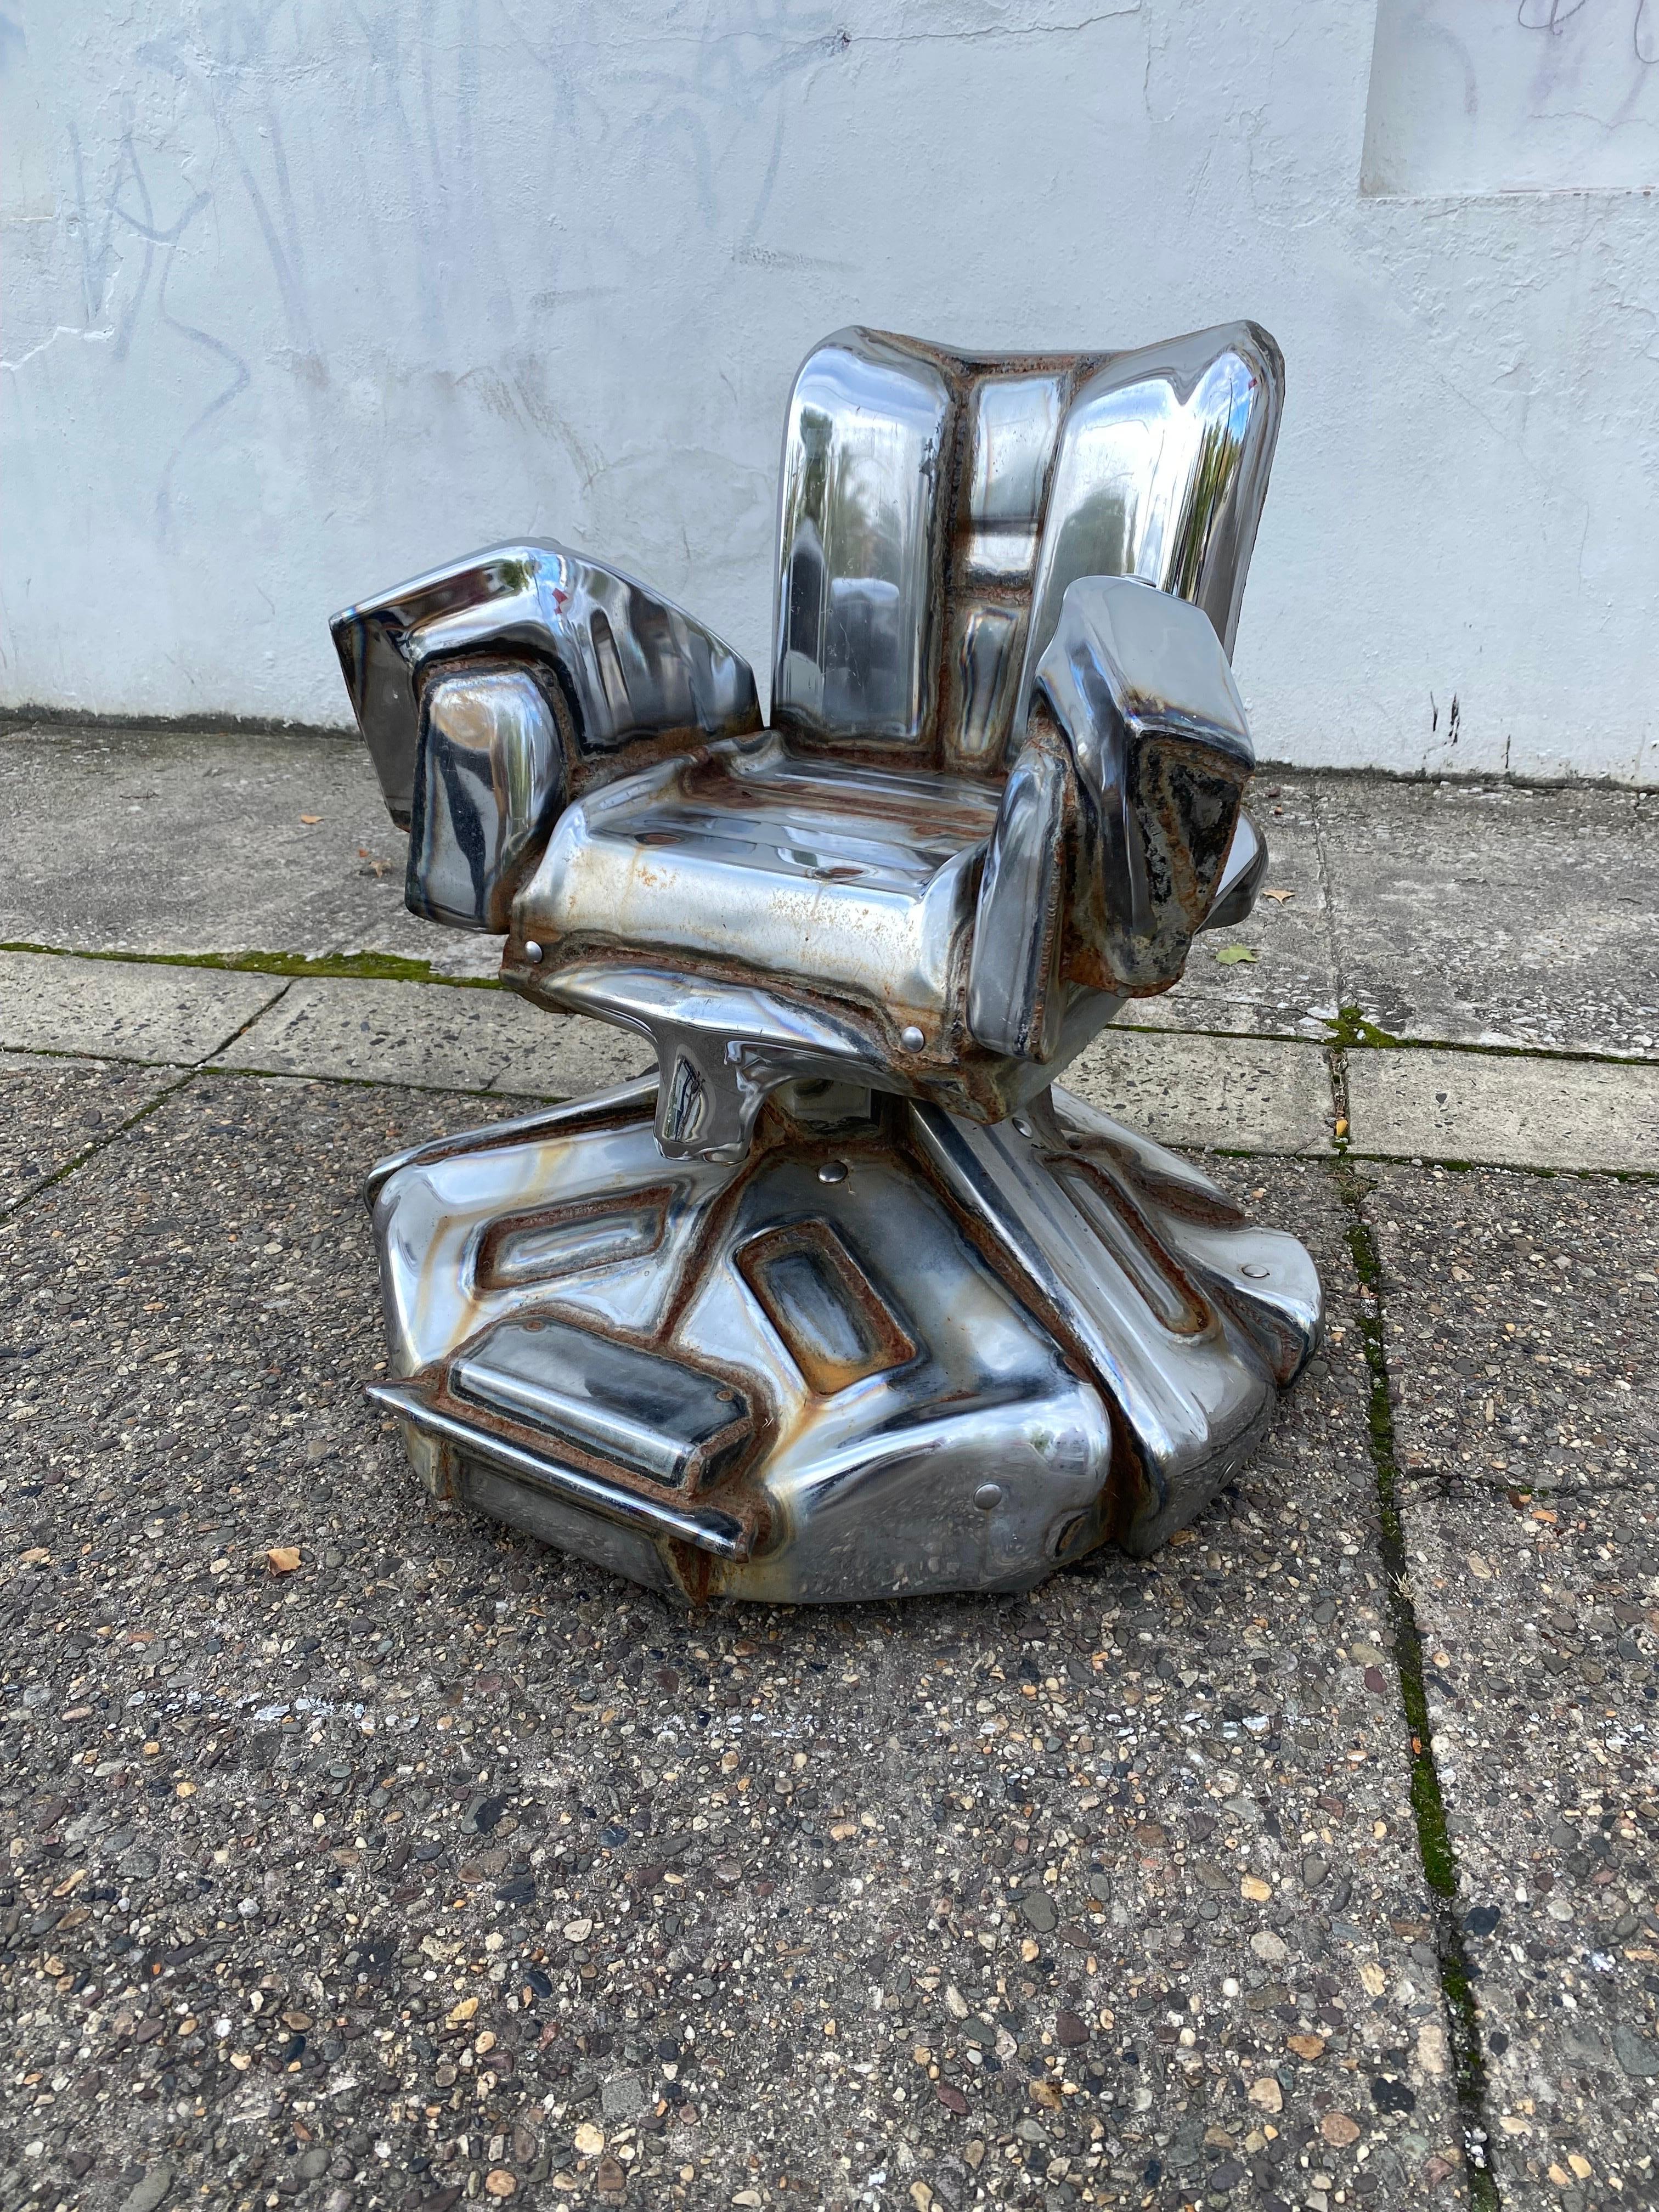 Jason Seley 1919- 1983,  Swivel Chrome Lounge Chair.  Beautifully made with bumpers from cars from the 50's and 60's.  Chair has a spinning mechanism to raise or lower plus wheels to move around.  Seley was the Dean of Architecture at Cornell